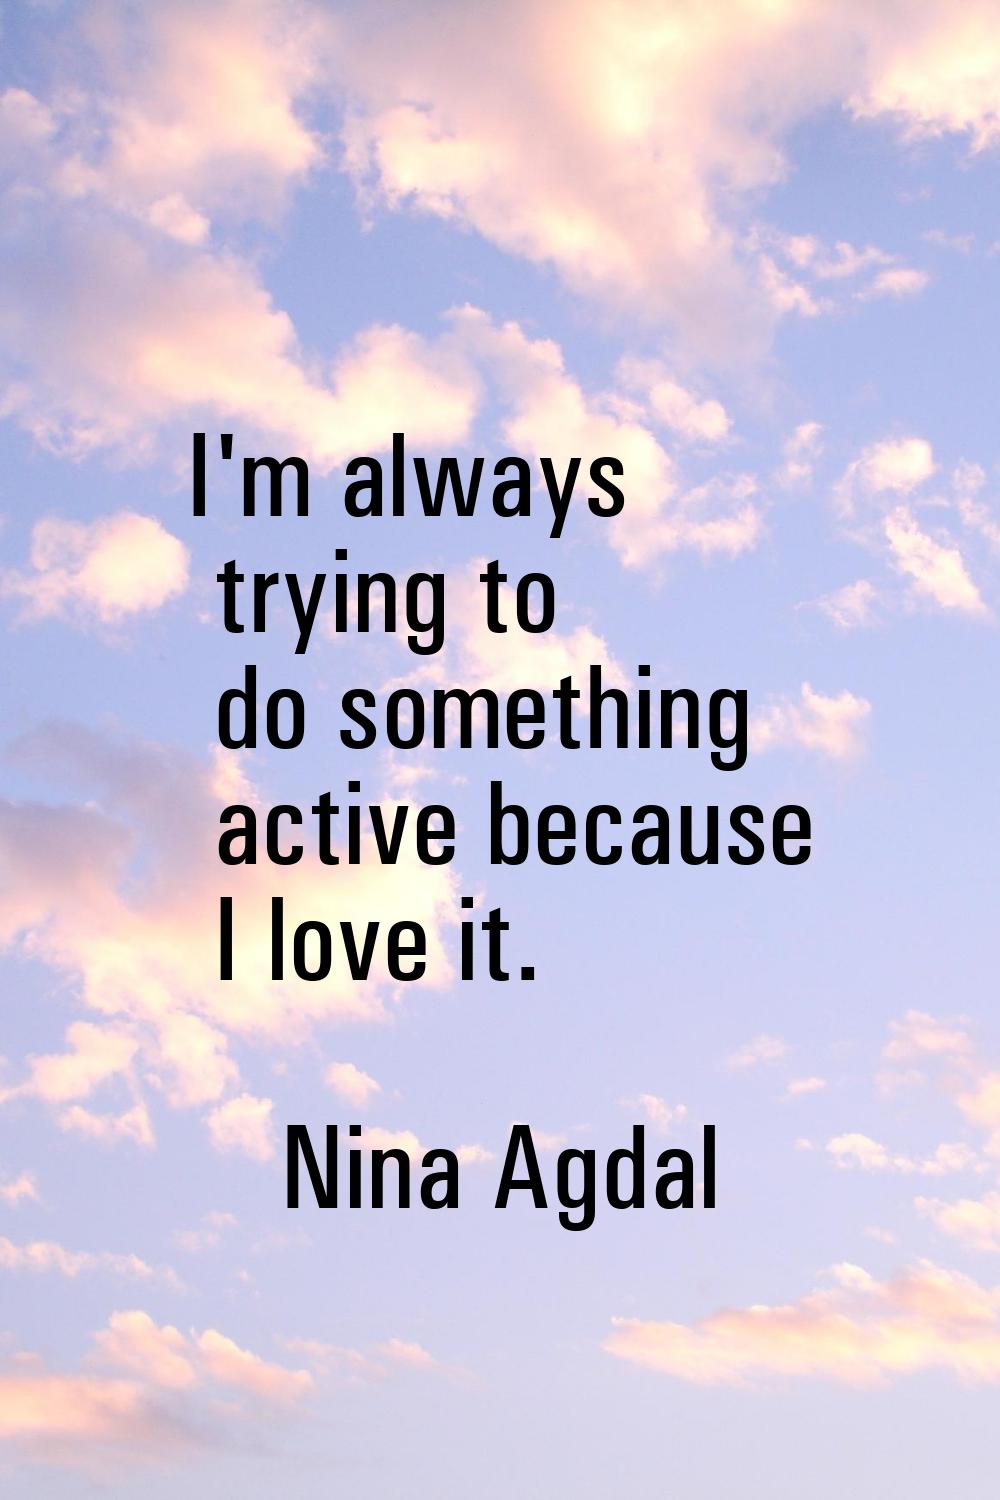 I'm always trying to do something active because I love it.